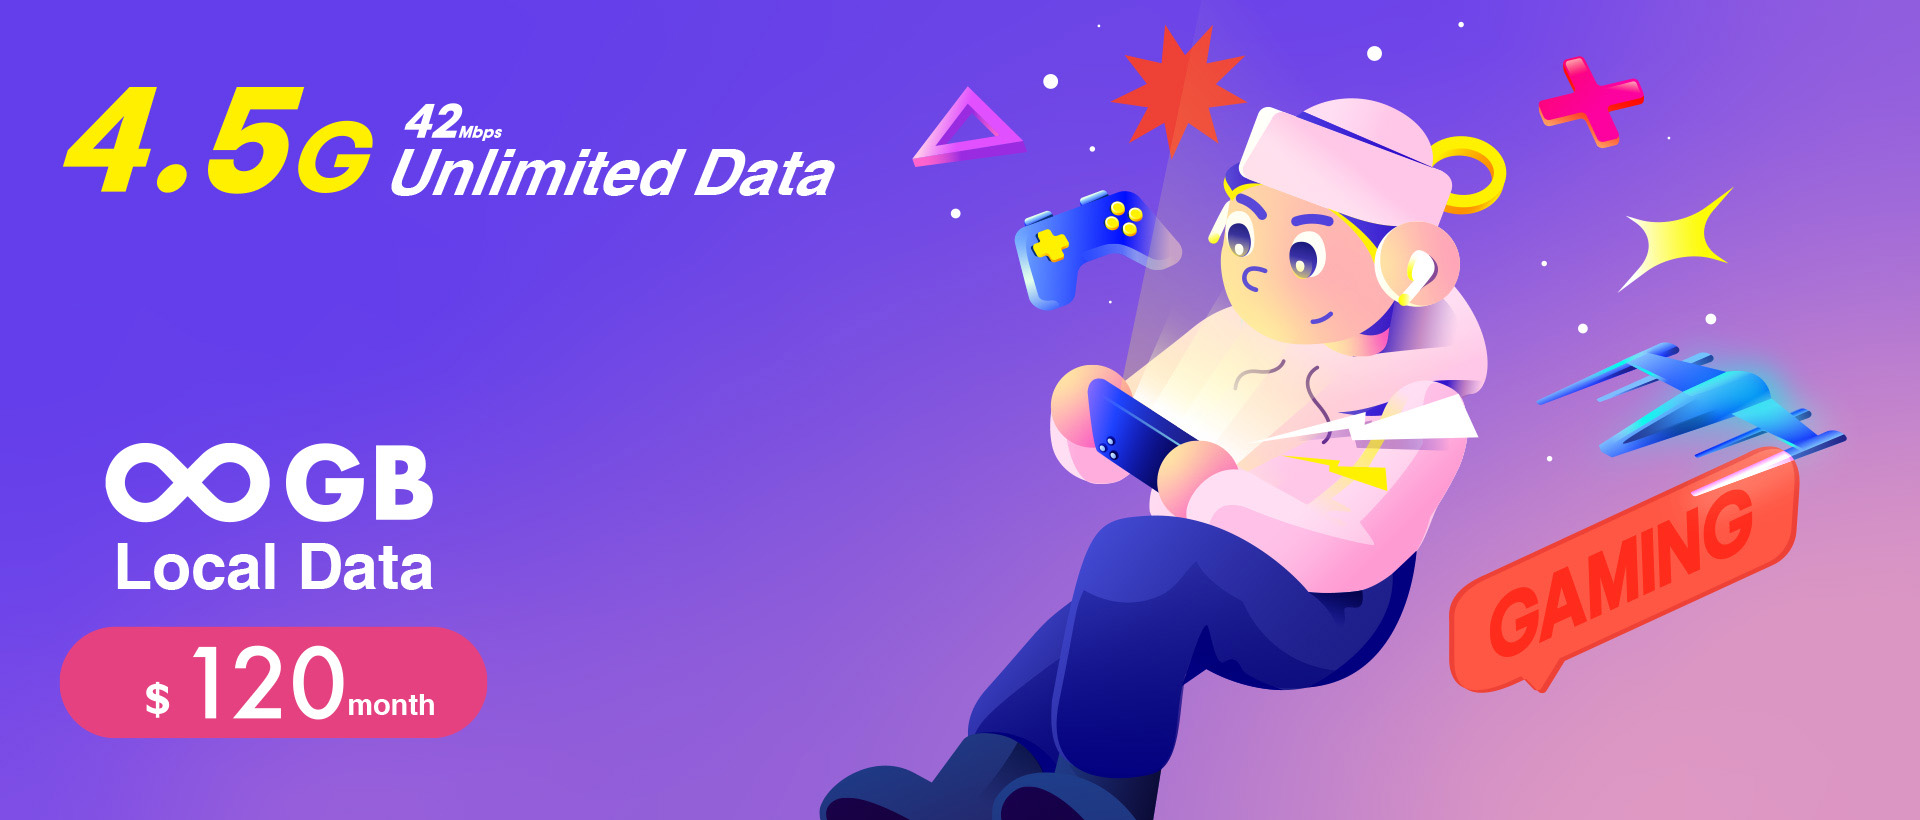 42Mbps Monthly Plan $120 unlimited data

